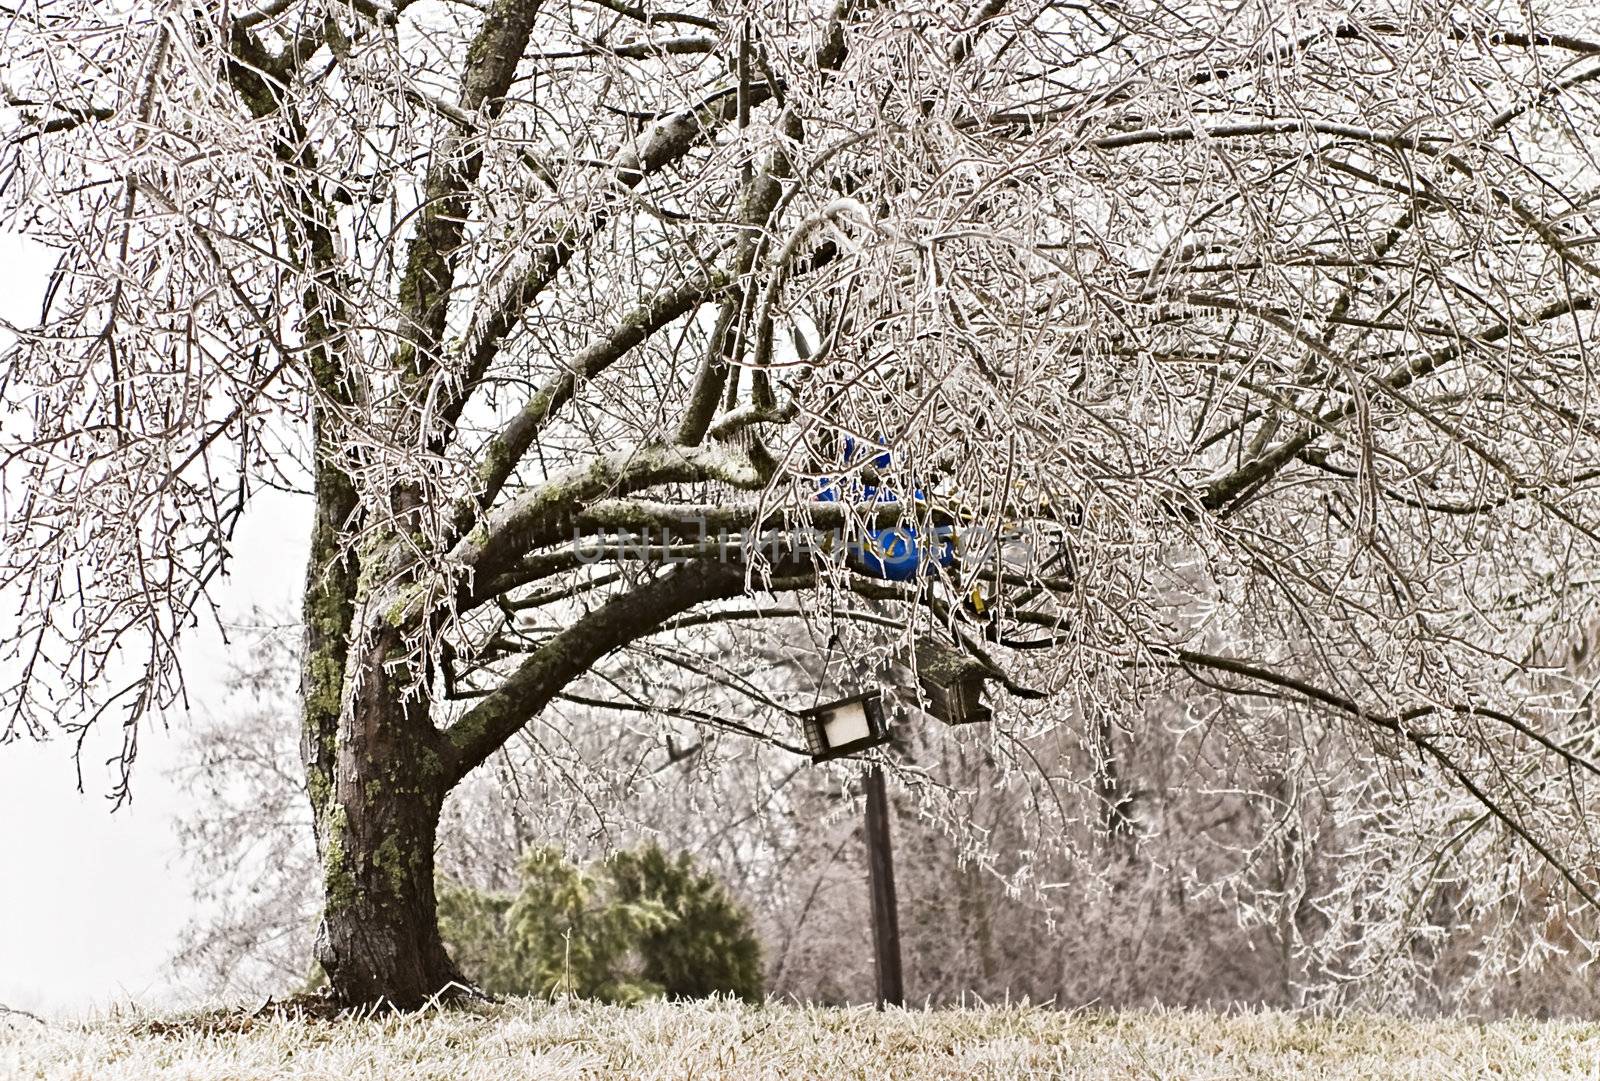 tree covered in ice from 2009 ice storm in KY

